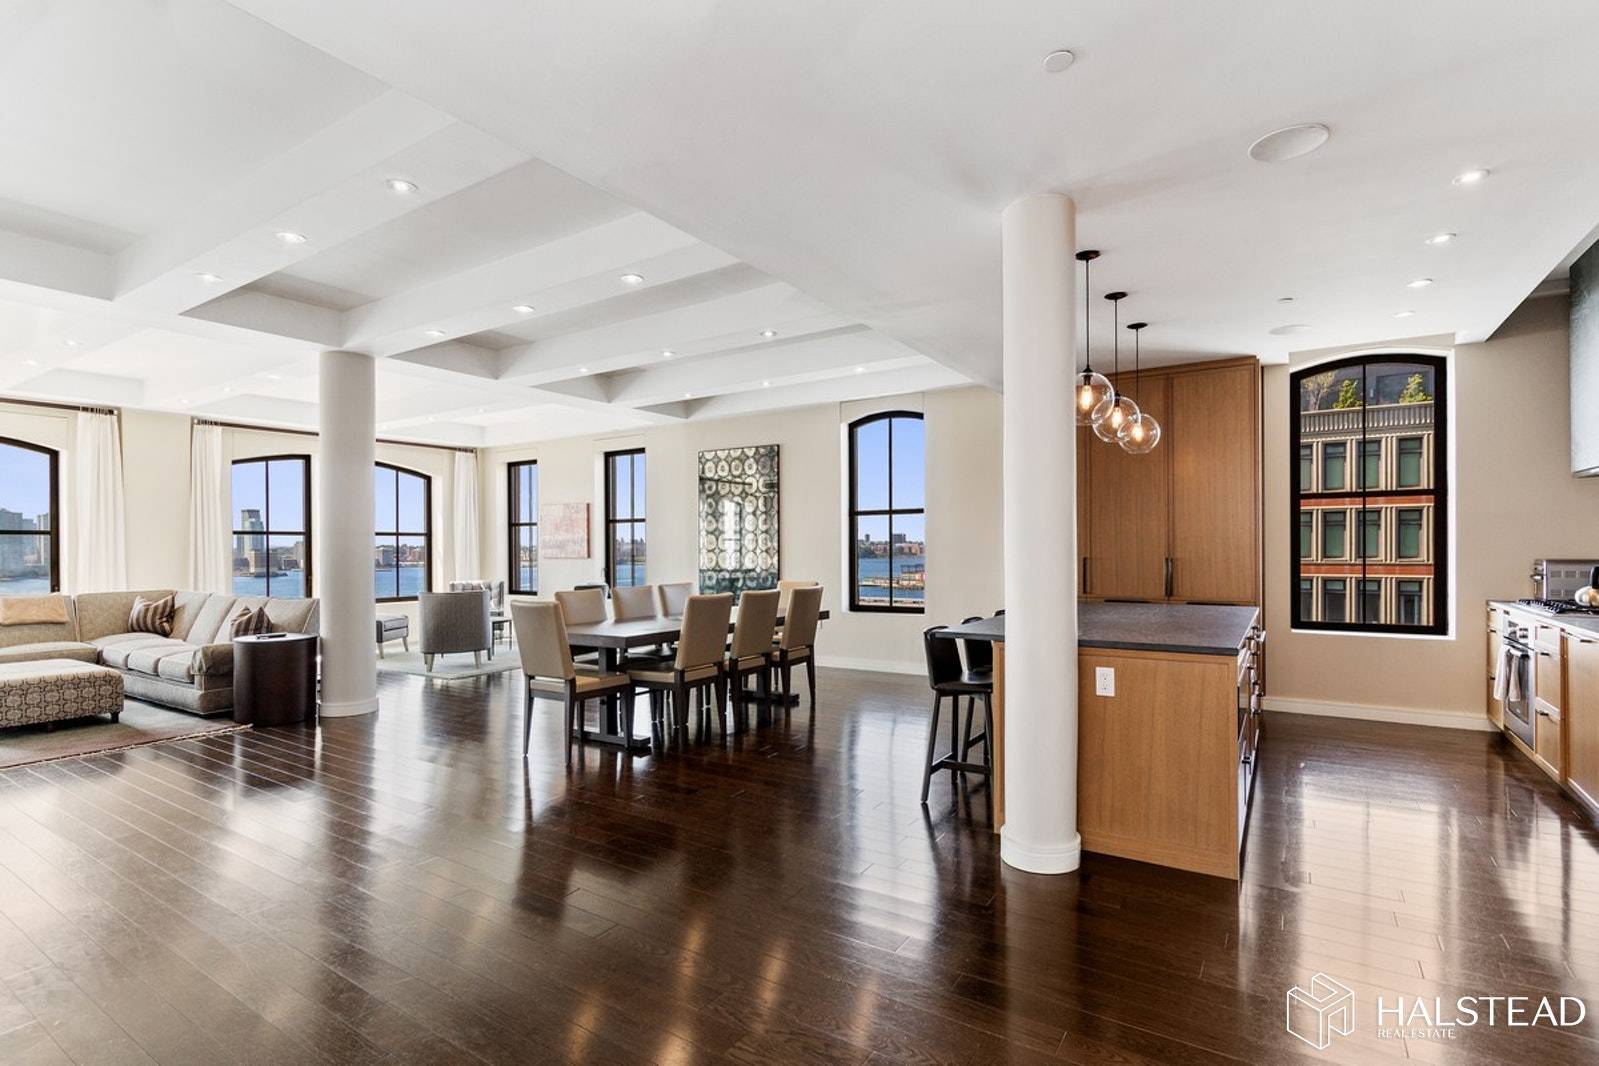 This stunning residence is perched high above the Hudson River and features a sun drenched Living Dining room with high ceilings, gorgeous wide plank flooring, and spectacular sunset views from ...